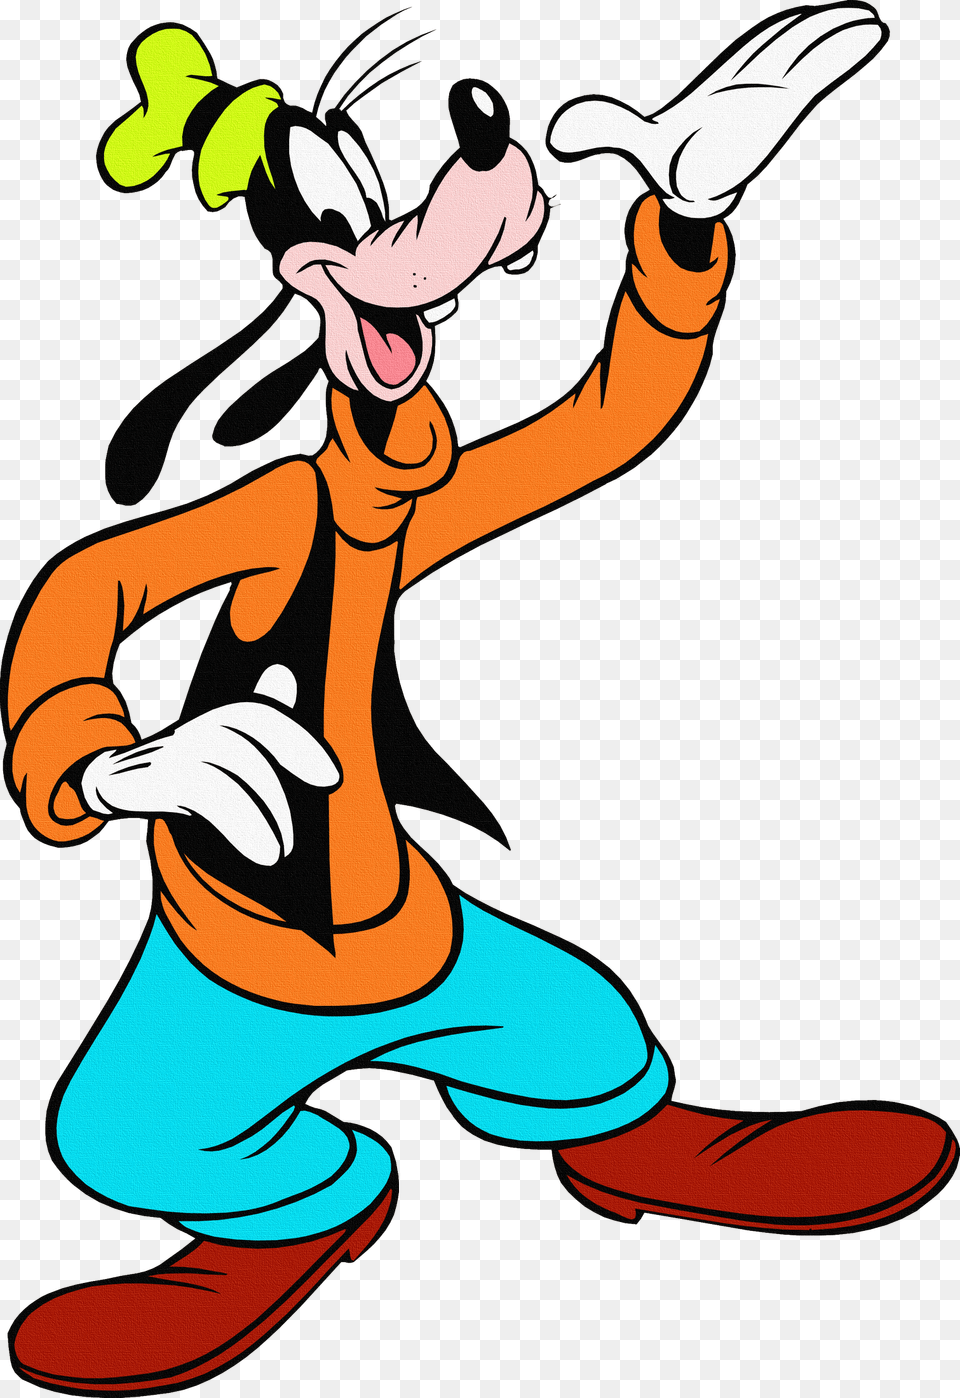 Goofy Disney Cartoon Characters, Person Free Transparent Png